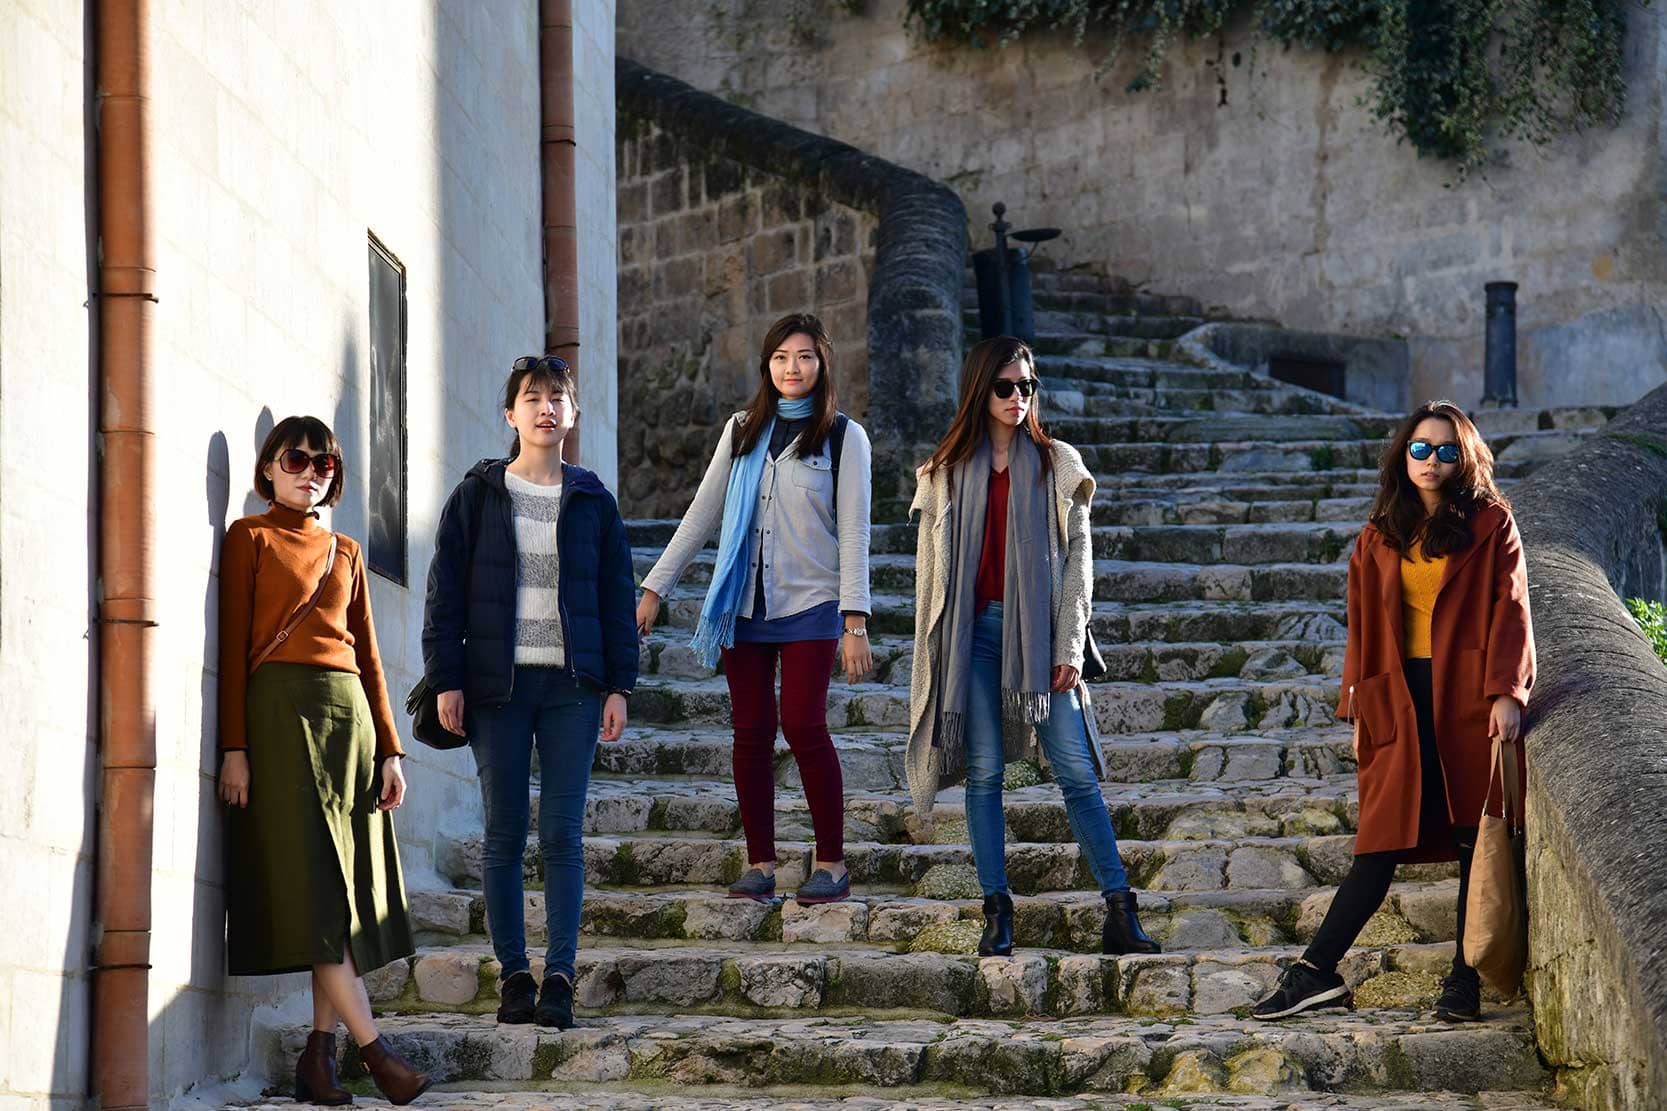 Asian friends posing as fashion models in Italy